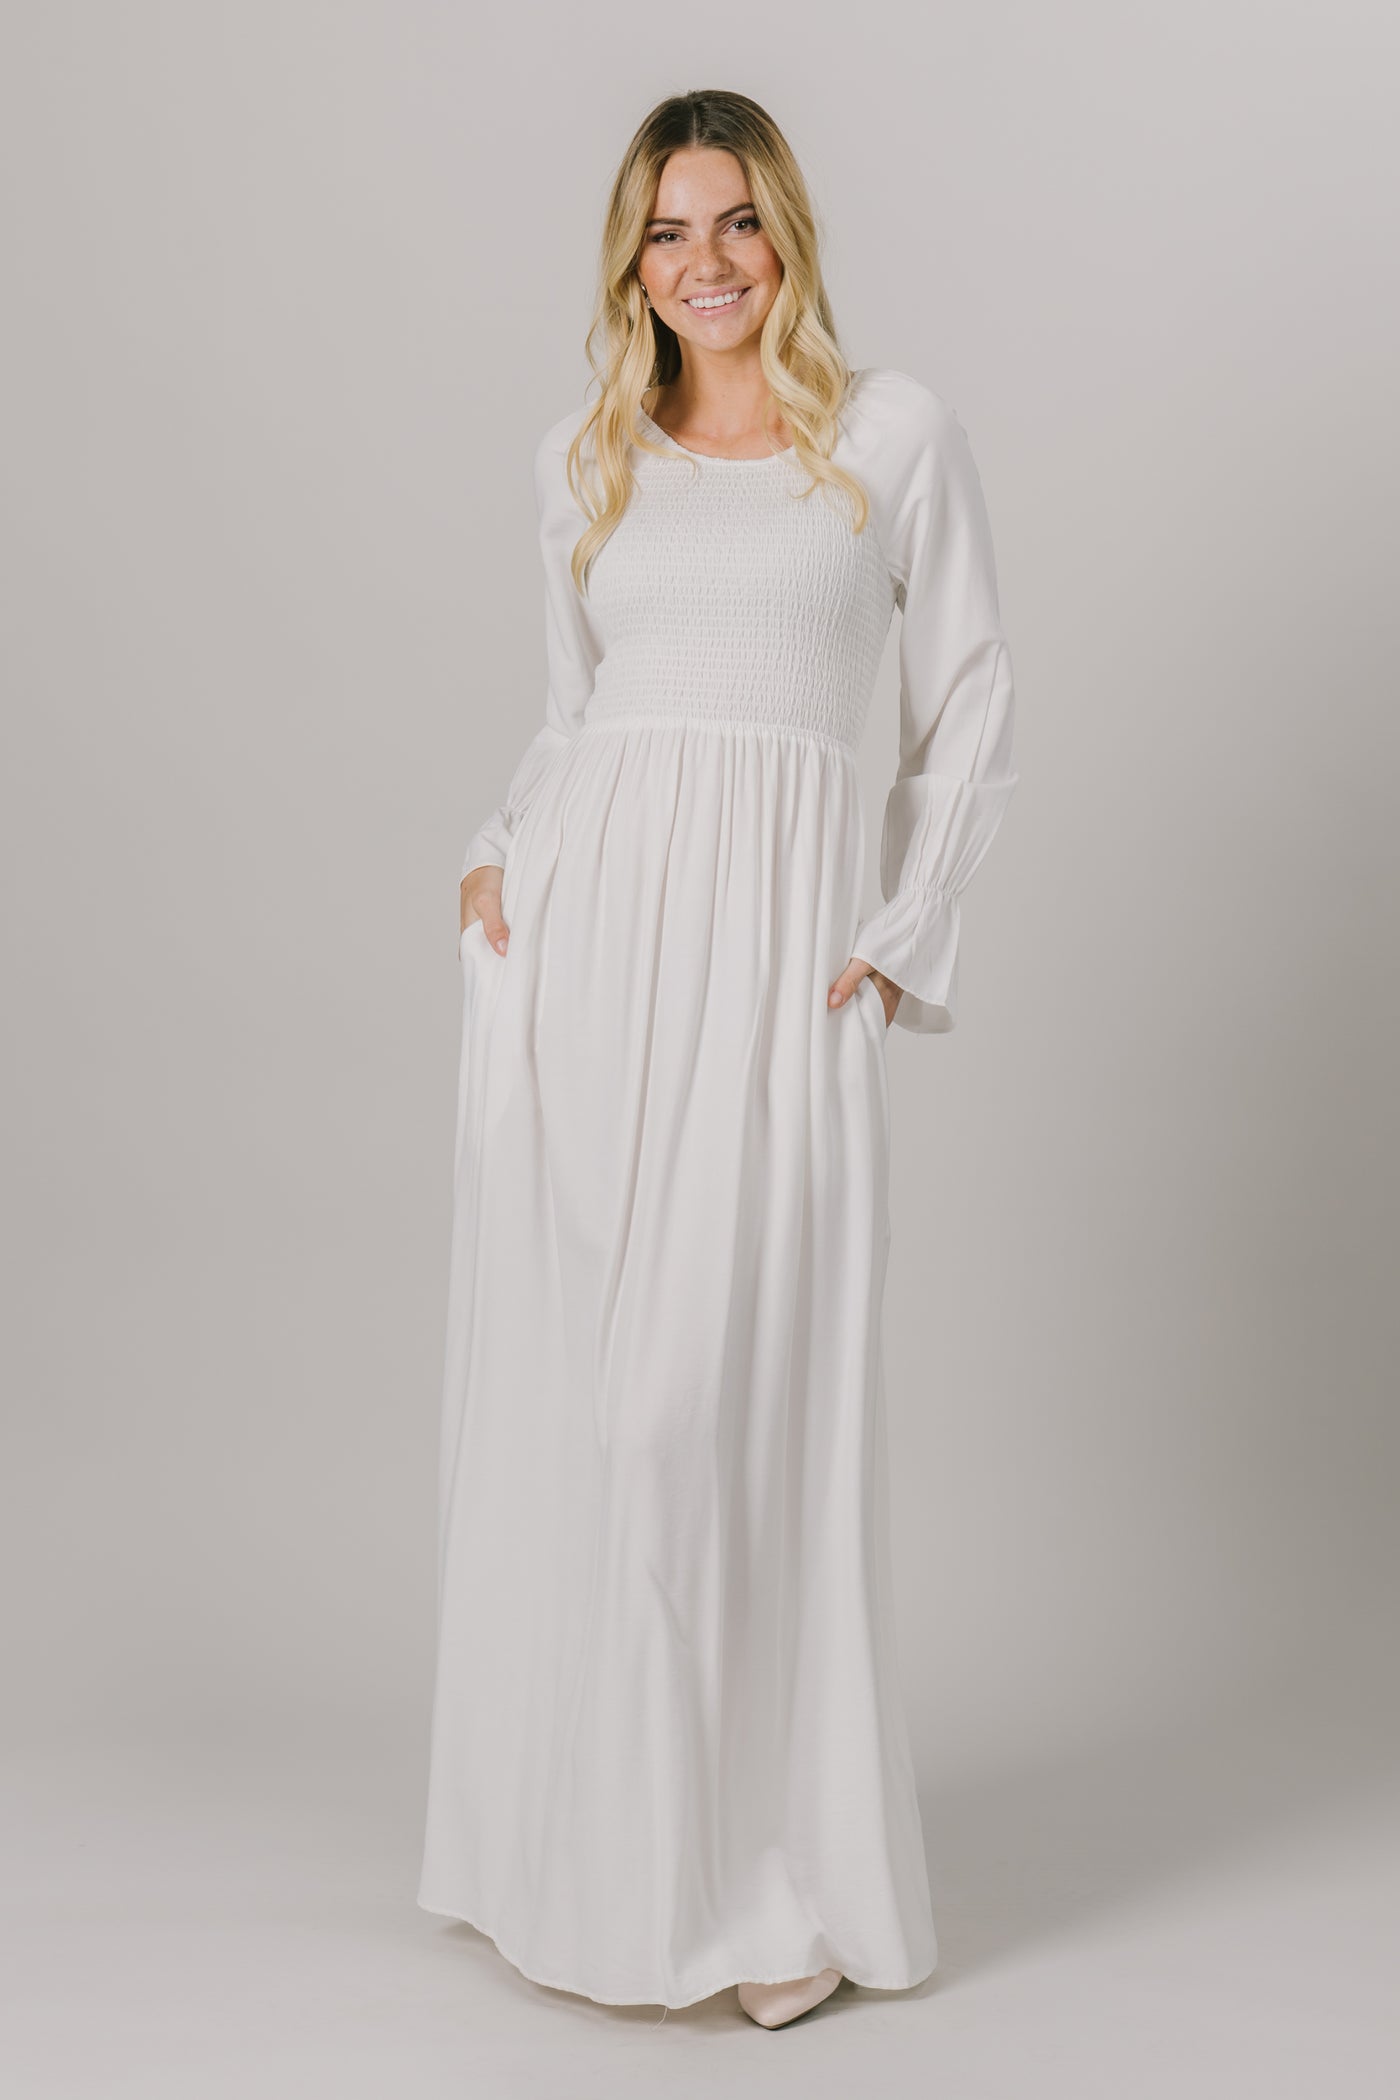 This LDS temple dress features a shirred, textured bodice and fun bell sleeves. It includes two pockets.